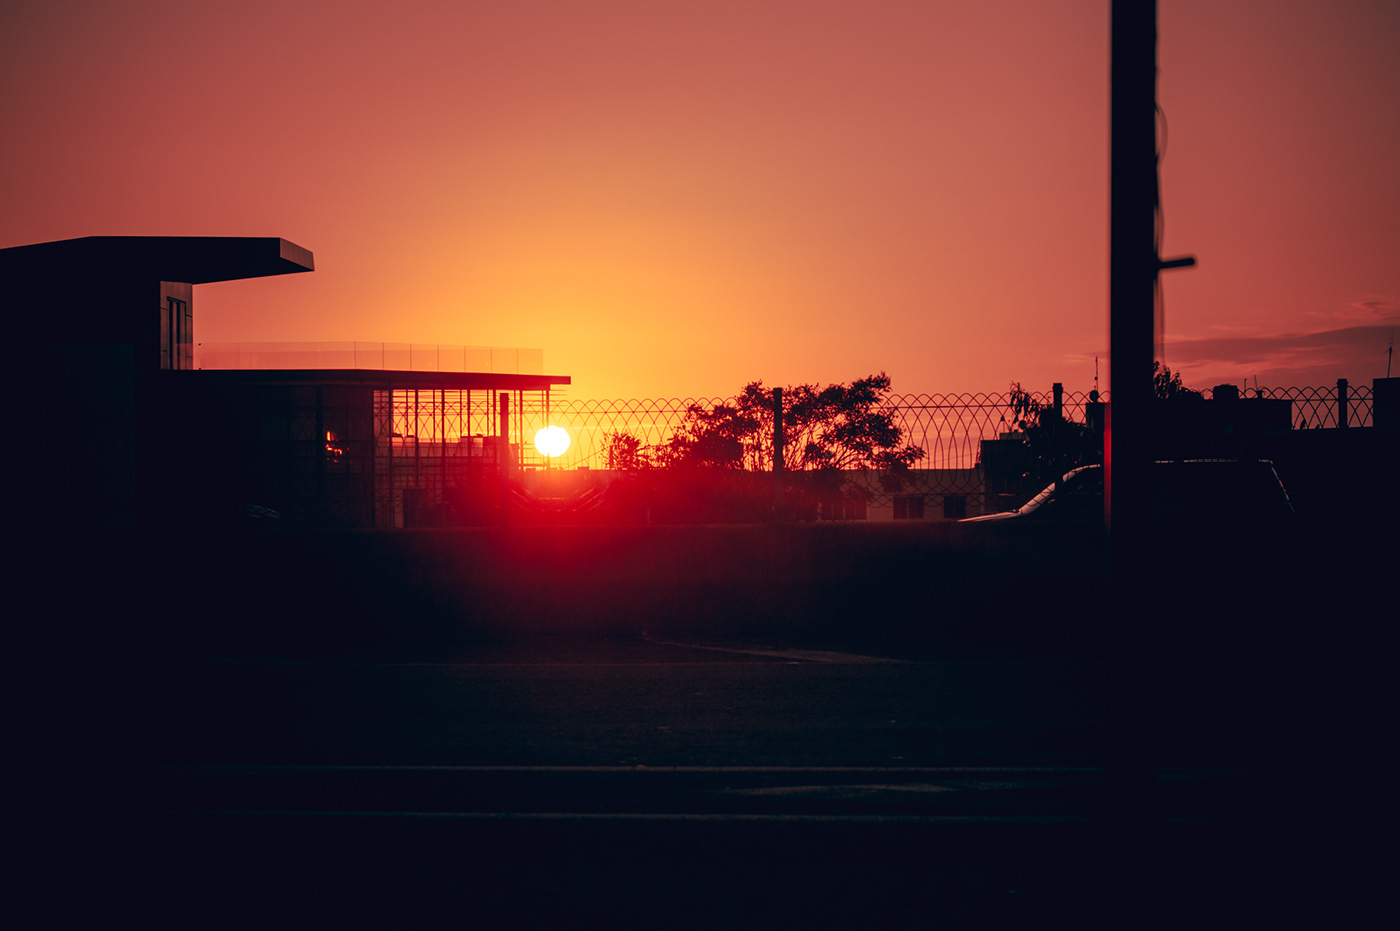 abstract cinematography Editing  Landscape light Nature Perspective Photography  street photography sunset